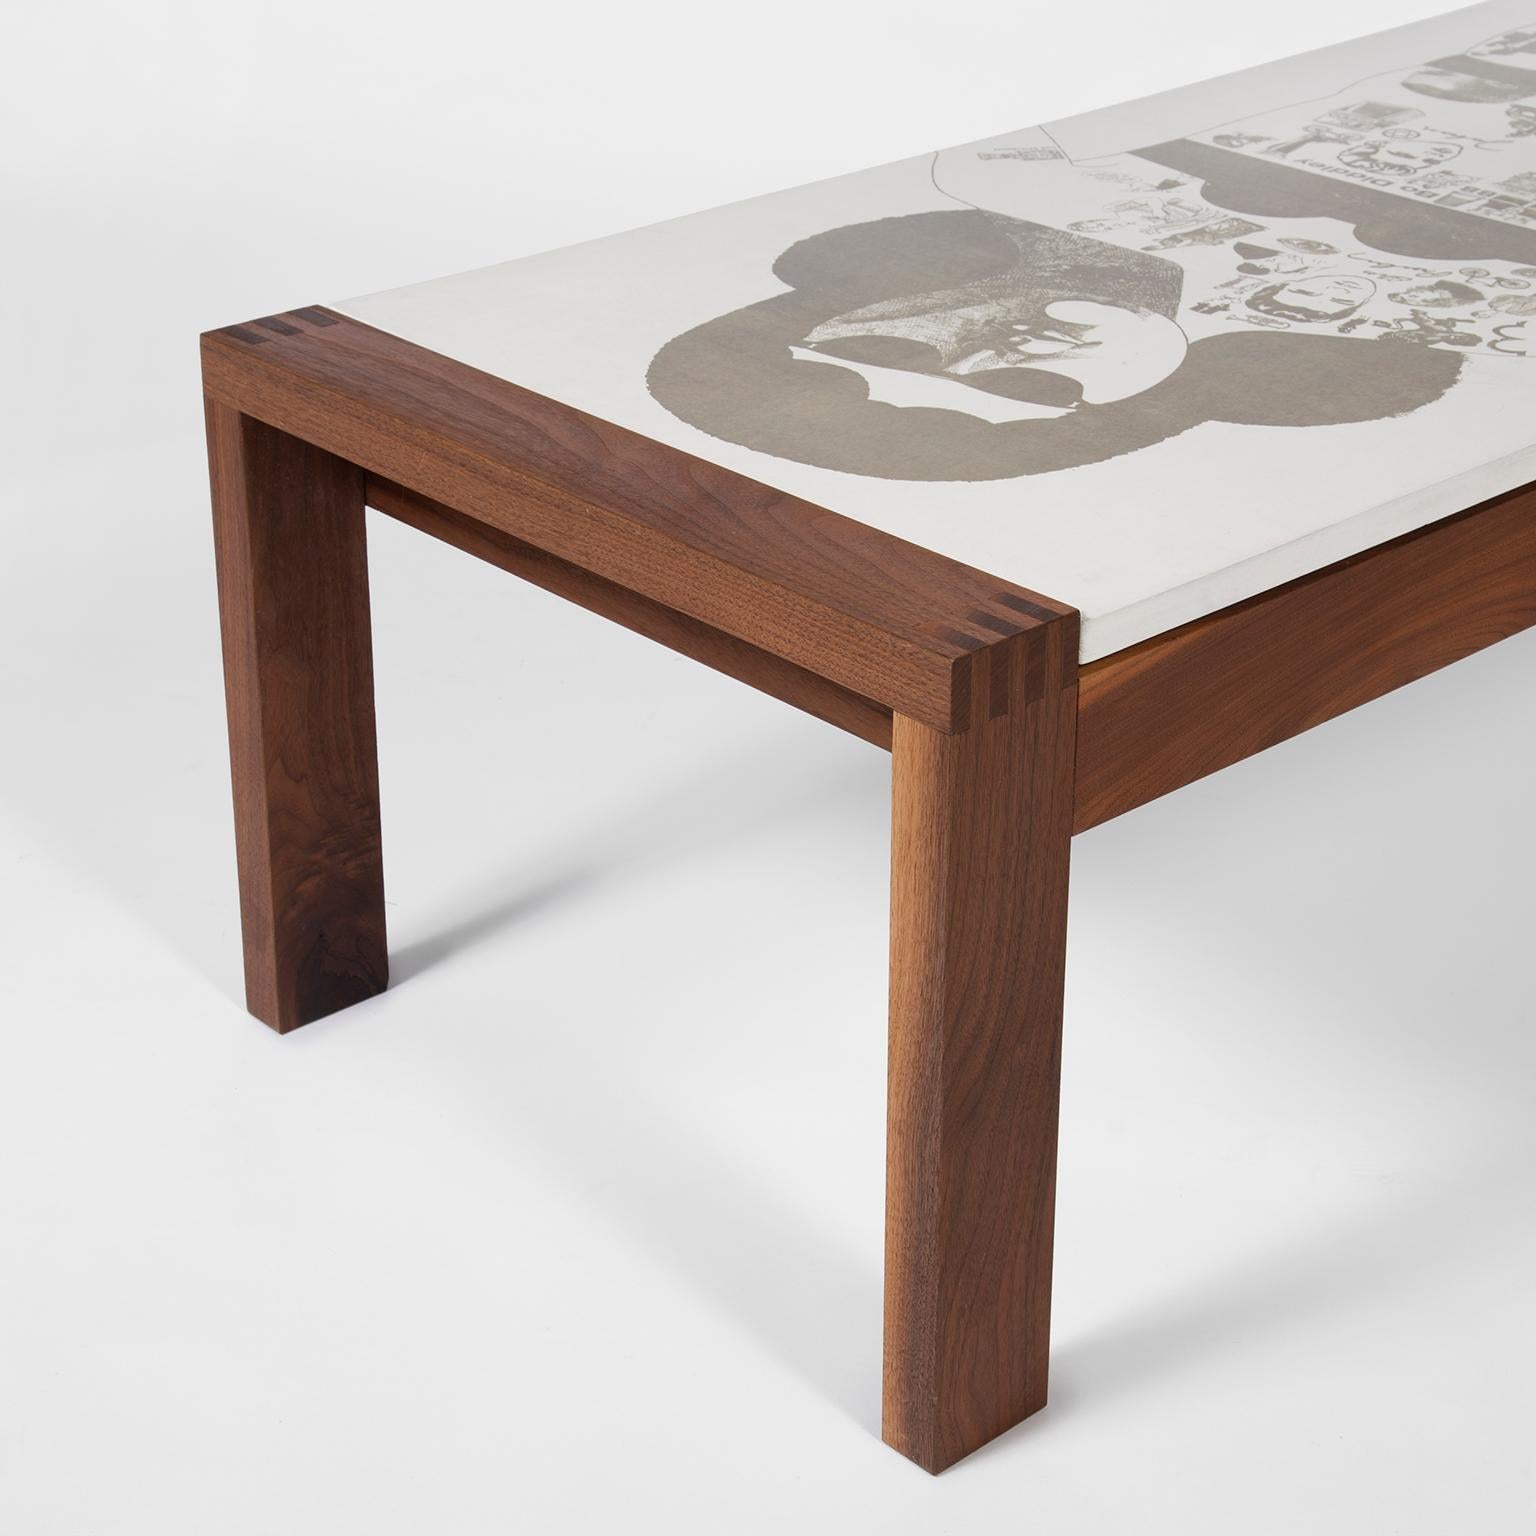 Laminate Tattoo Lady Table by DANAD Design 'Peter Blake' For Sale